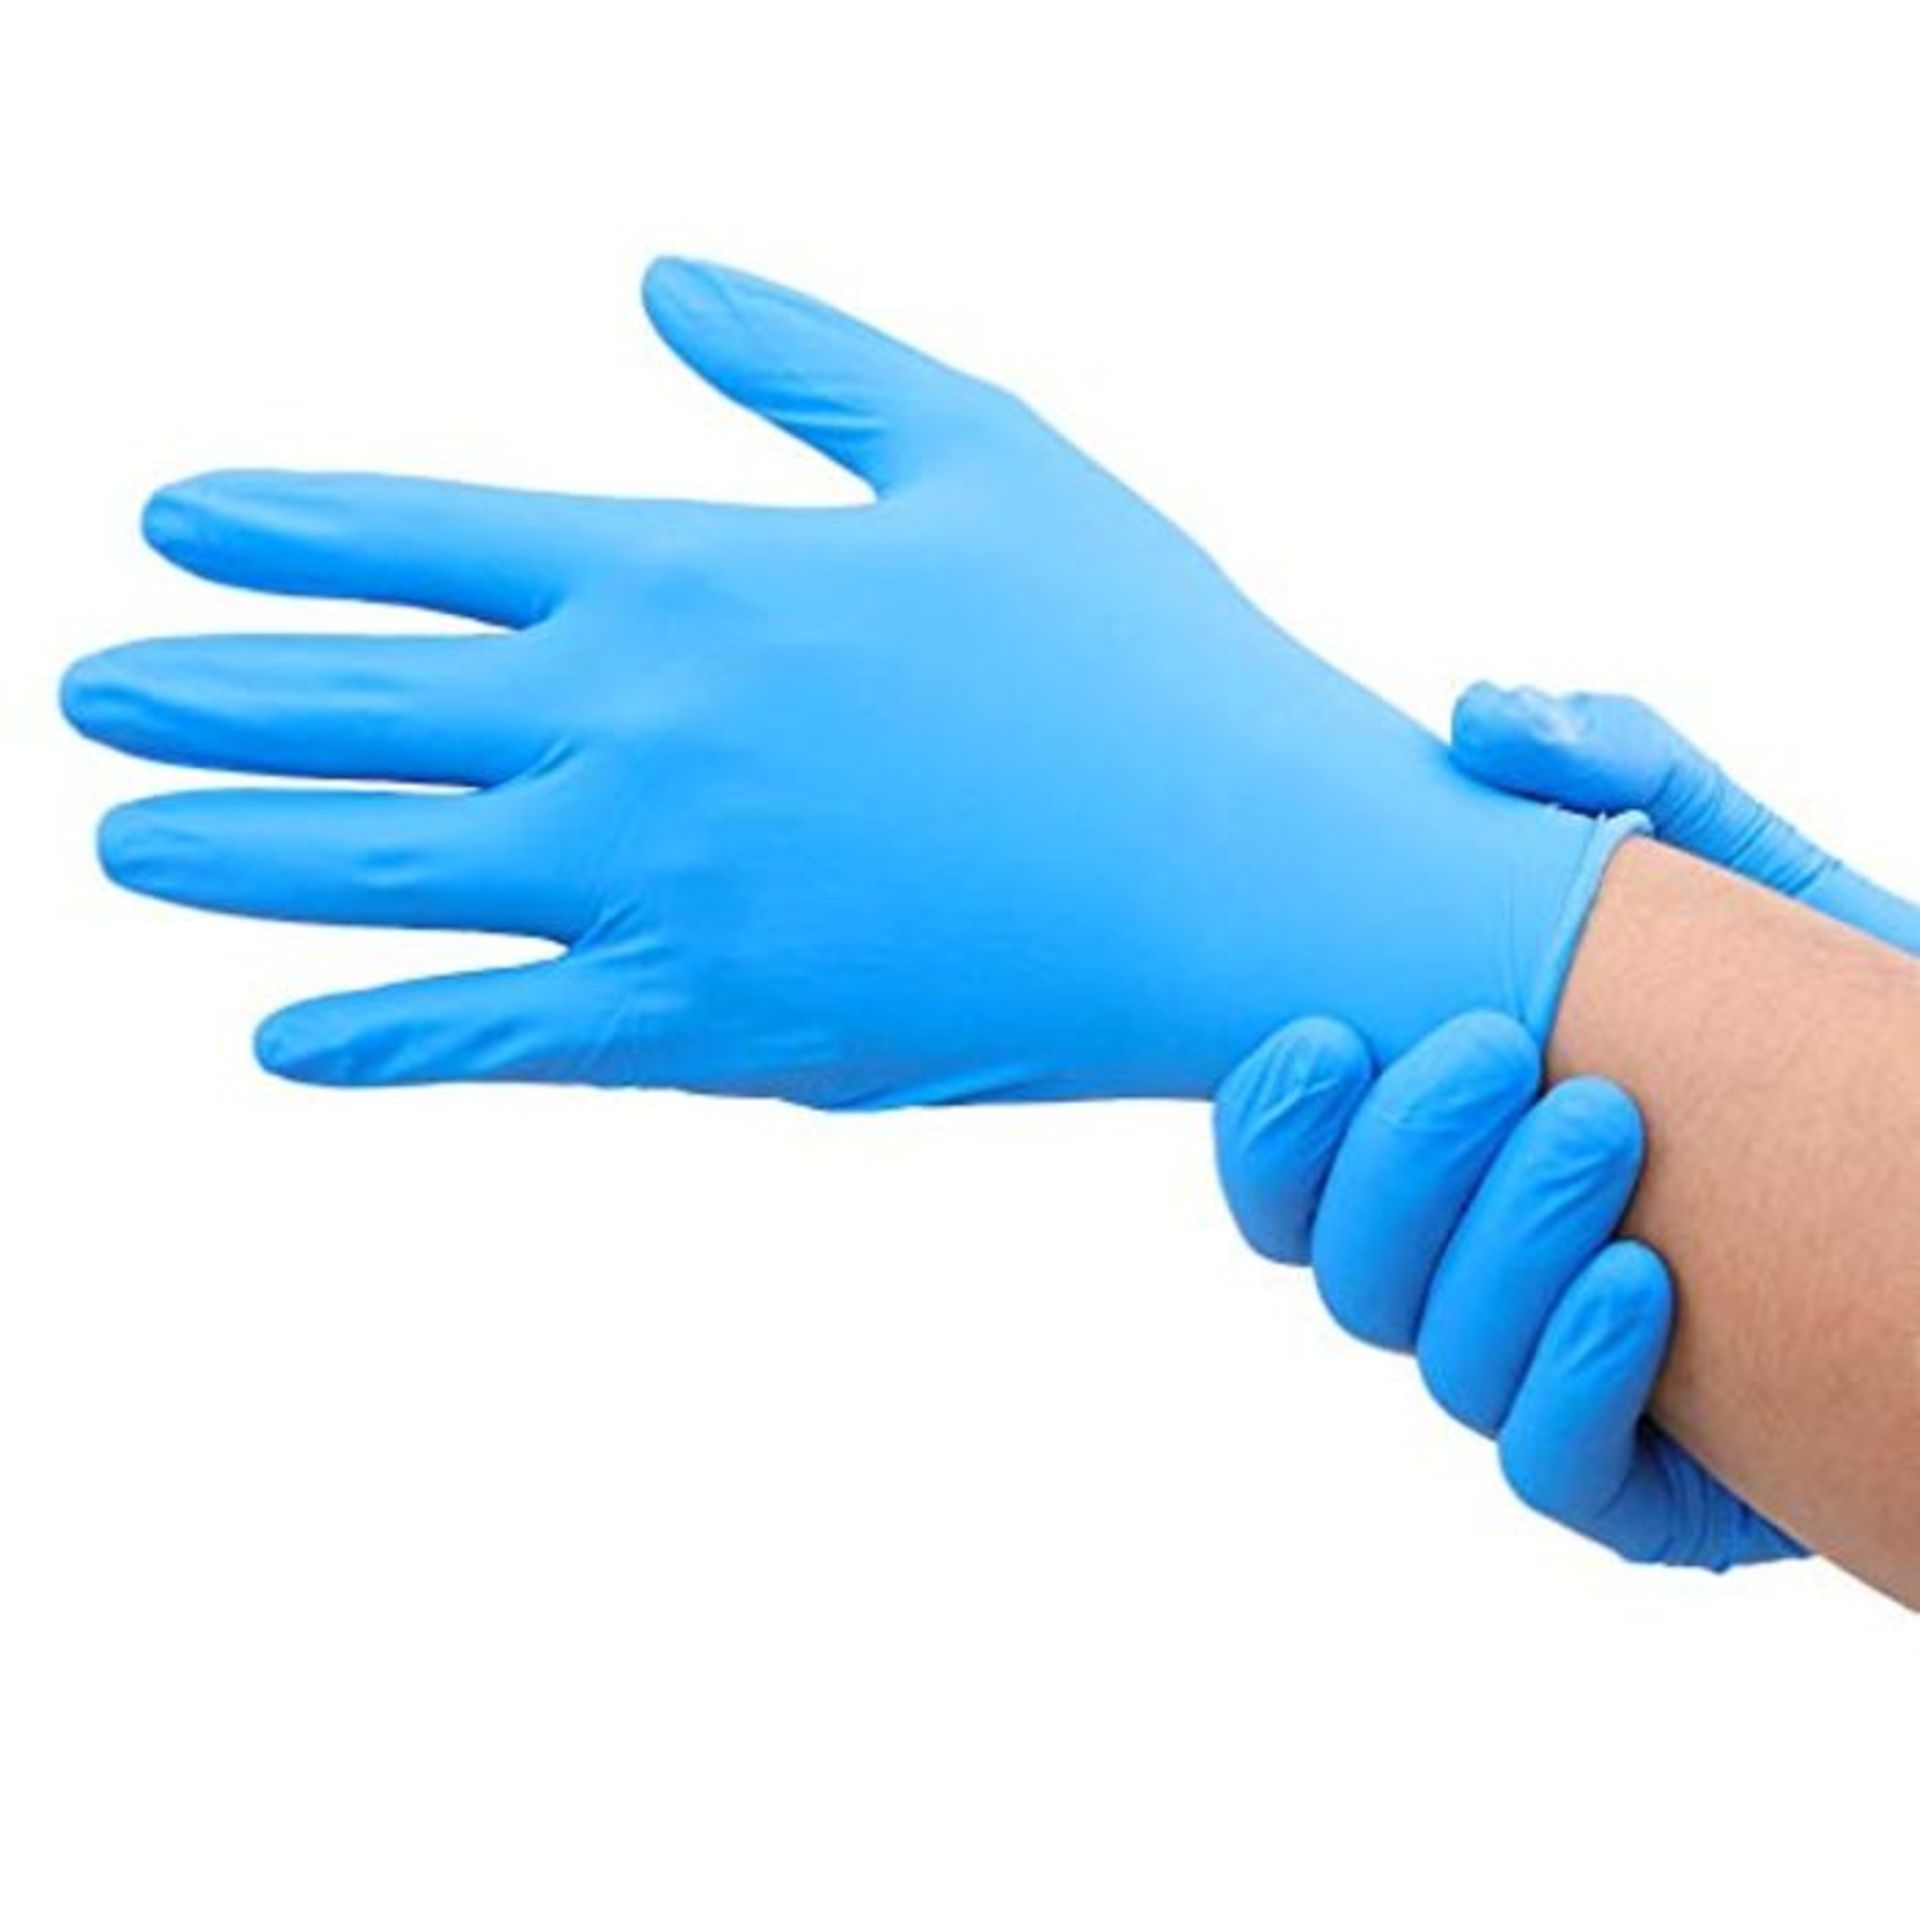 SousVideTools 100 Pieces Medical Nitrile Gloves, Blue Disposable Gloves Large, Latex F